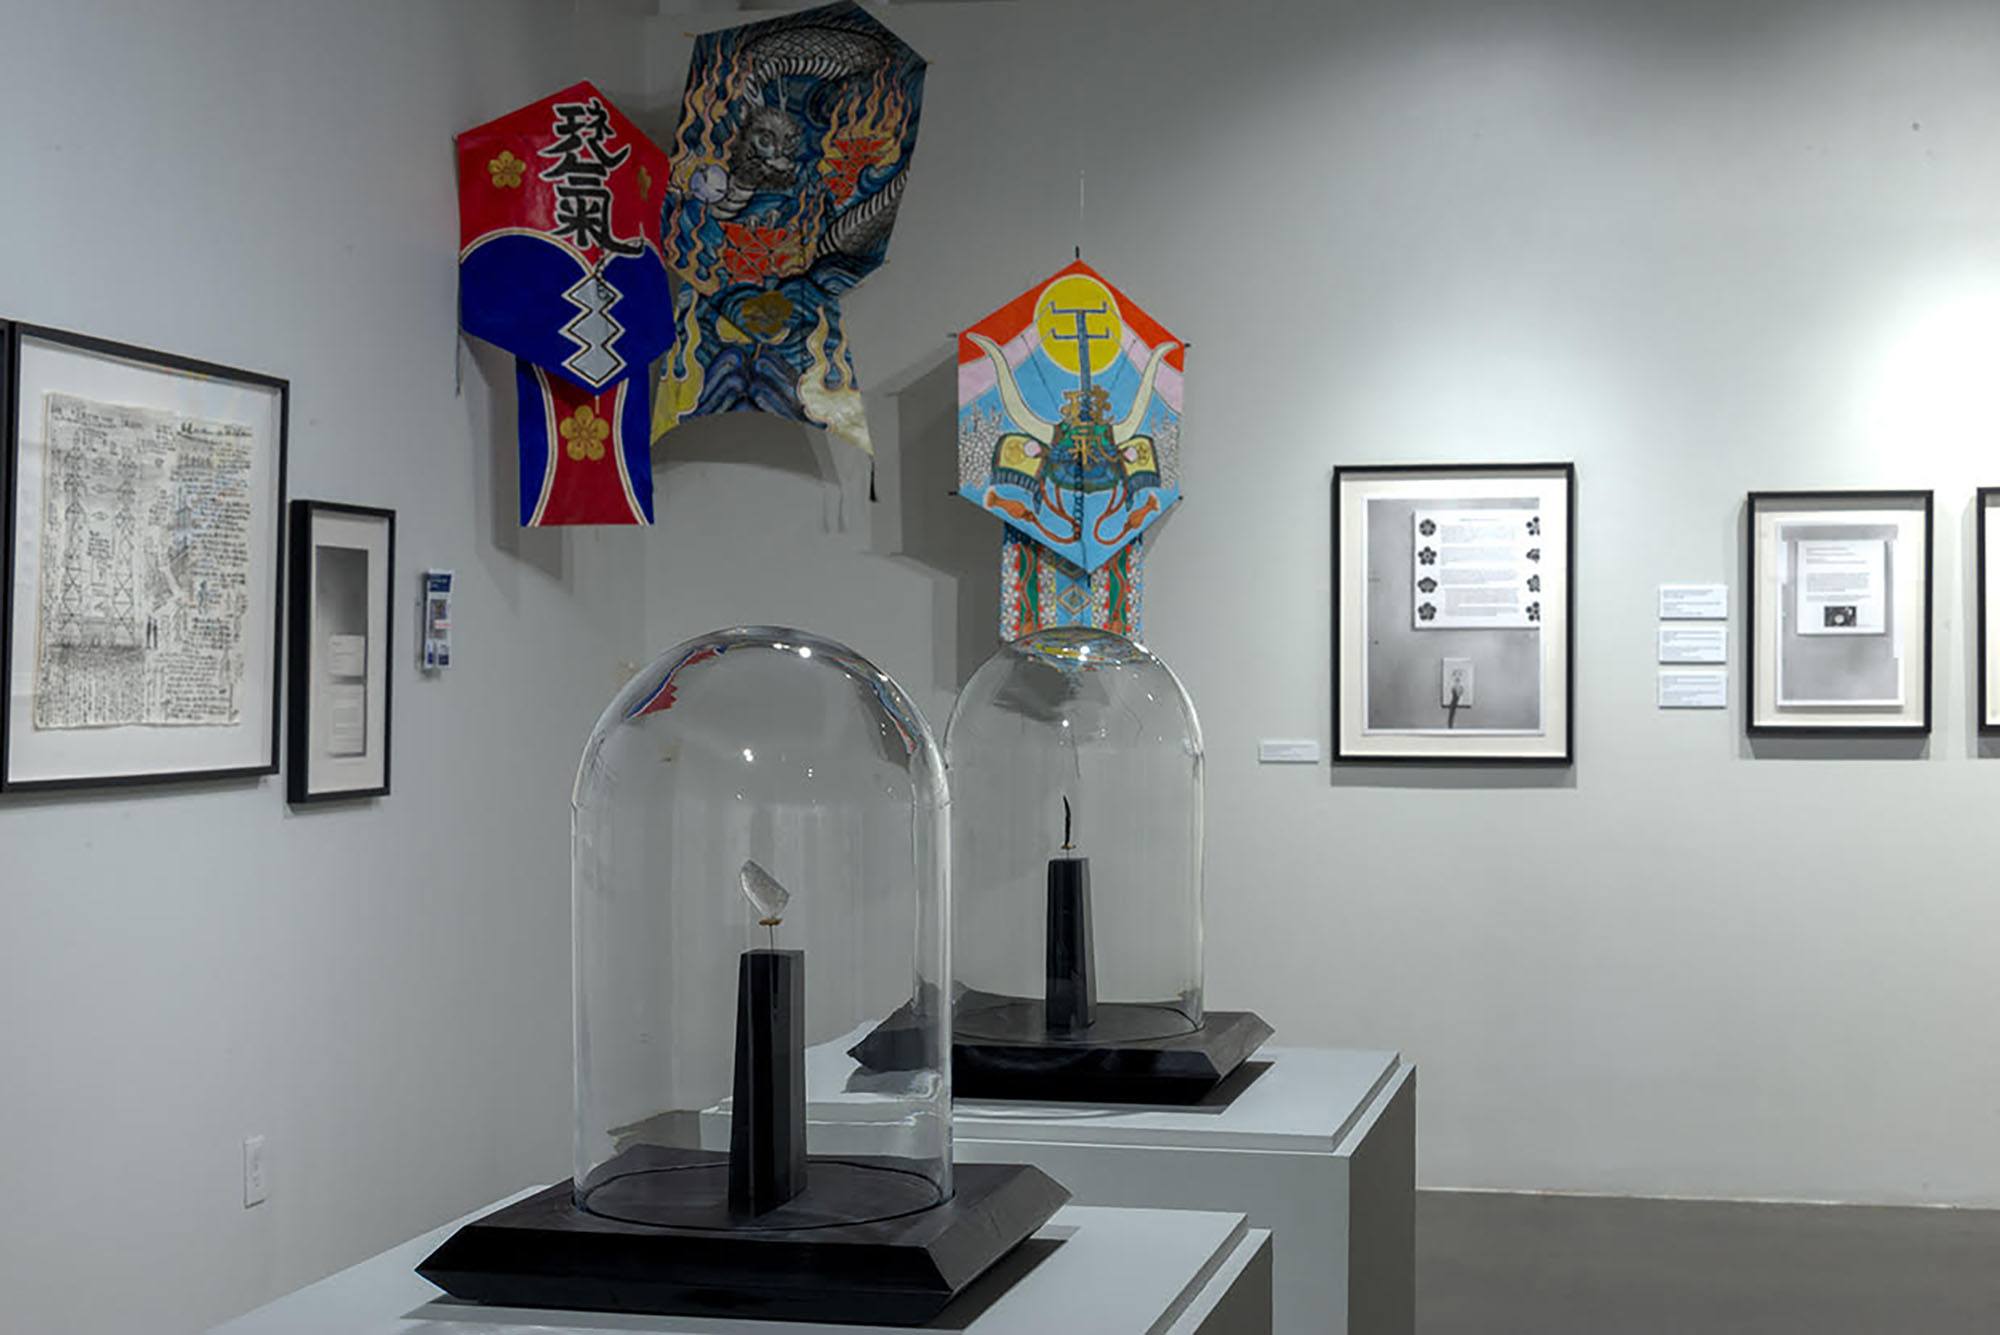 An installation view showing many artworks